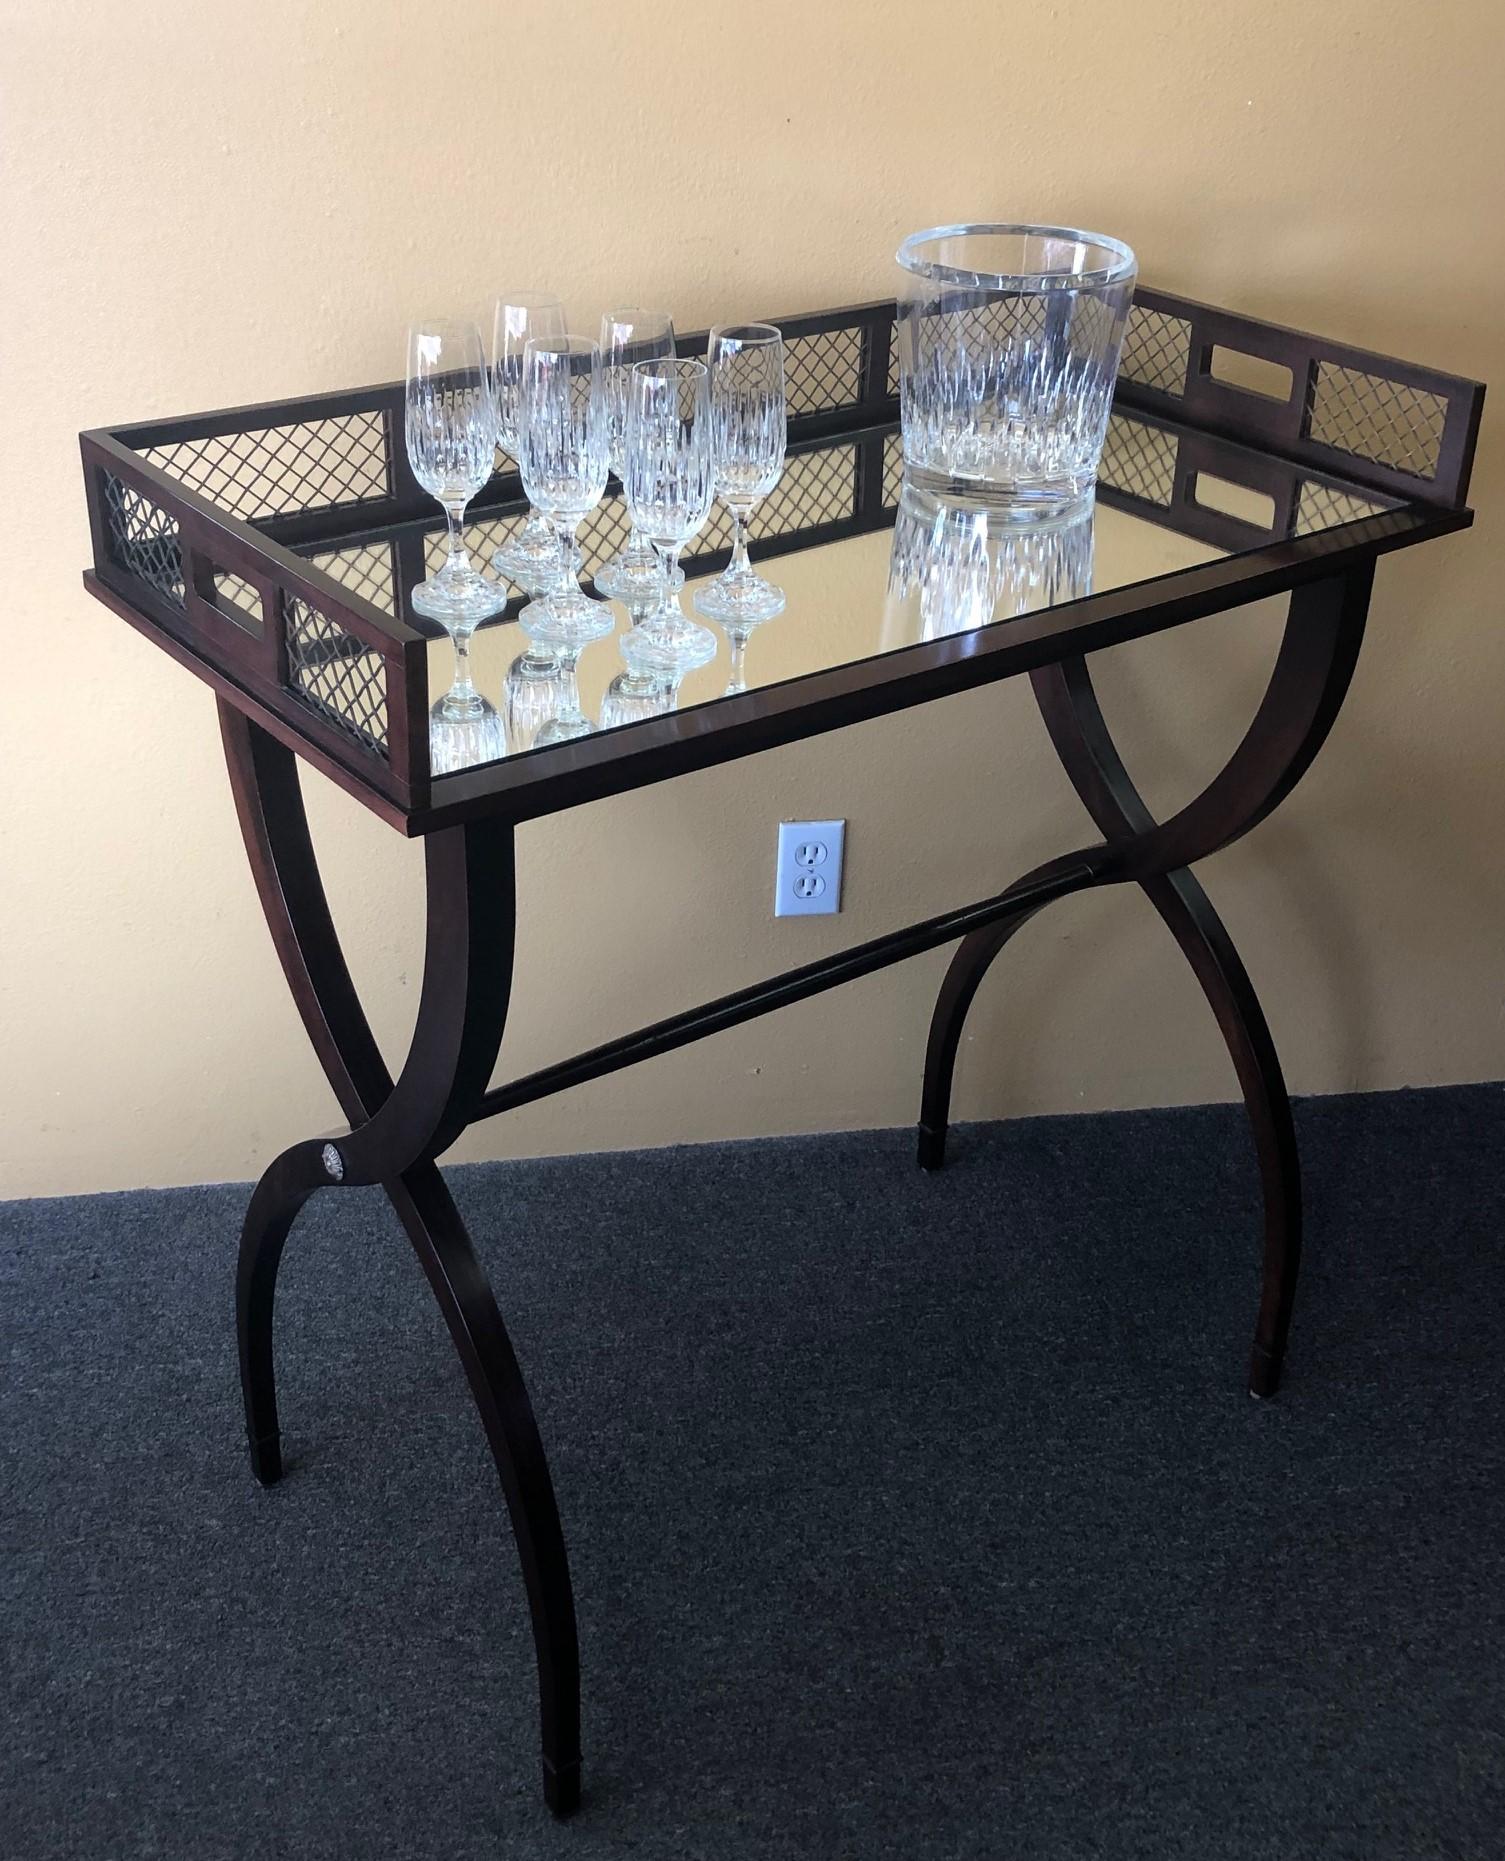 Fabulous drinks / cocktail tray table by Barbara Barry for Baker, circa 2000s. The two-piece mahogany drink table features a removable mirrored top tray with a wire mesh back splash and a arched leg stand with brass hardware. This is a very stylish